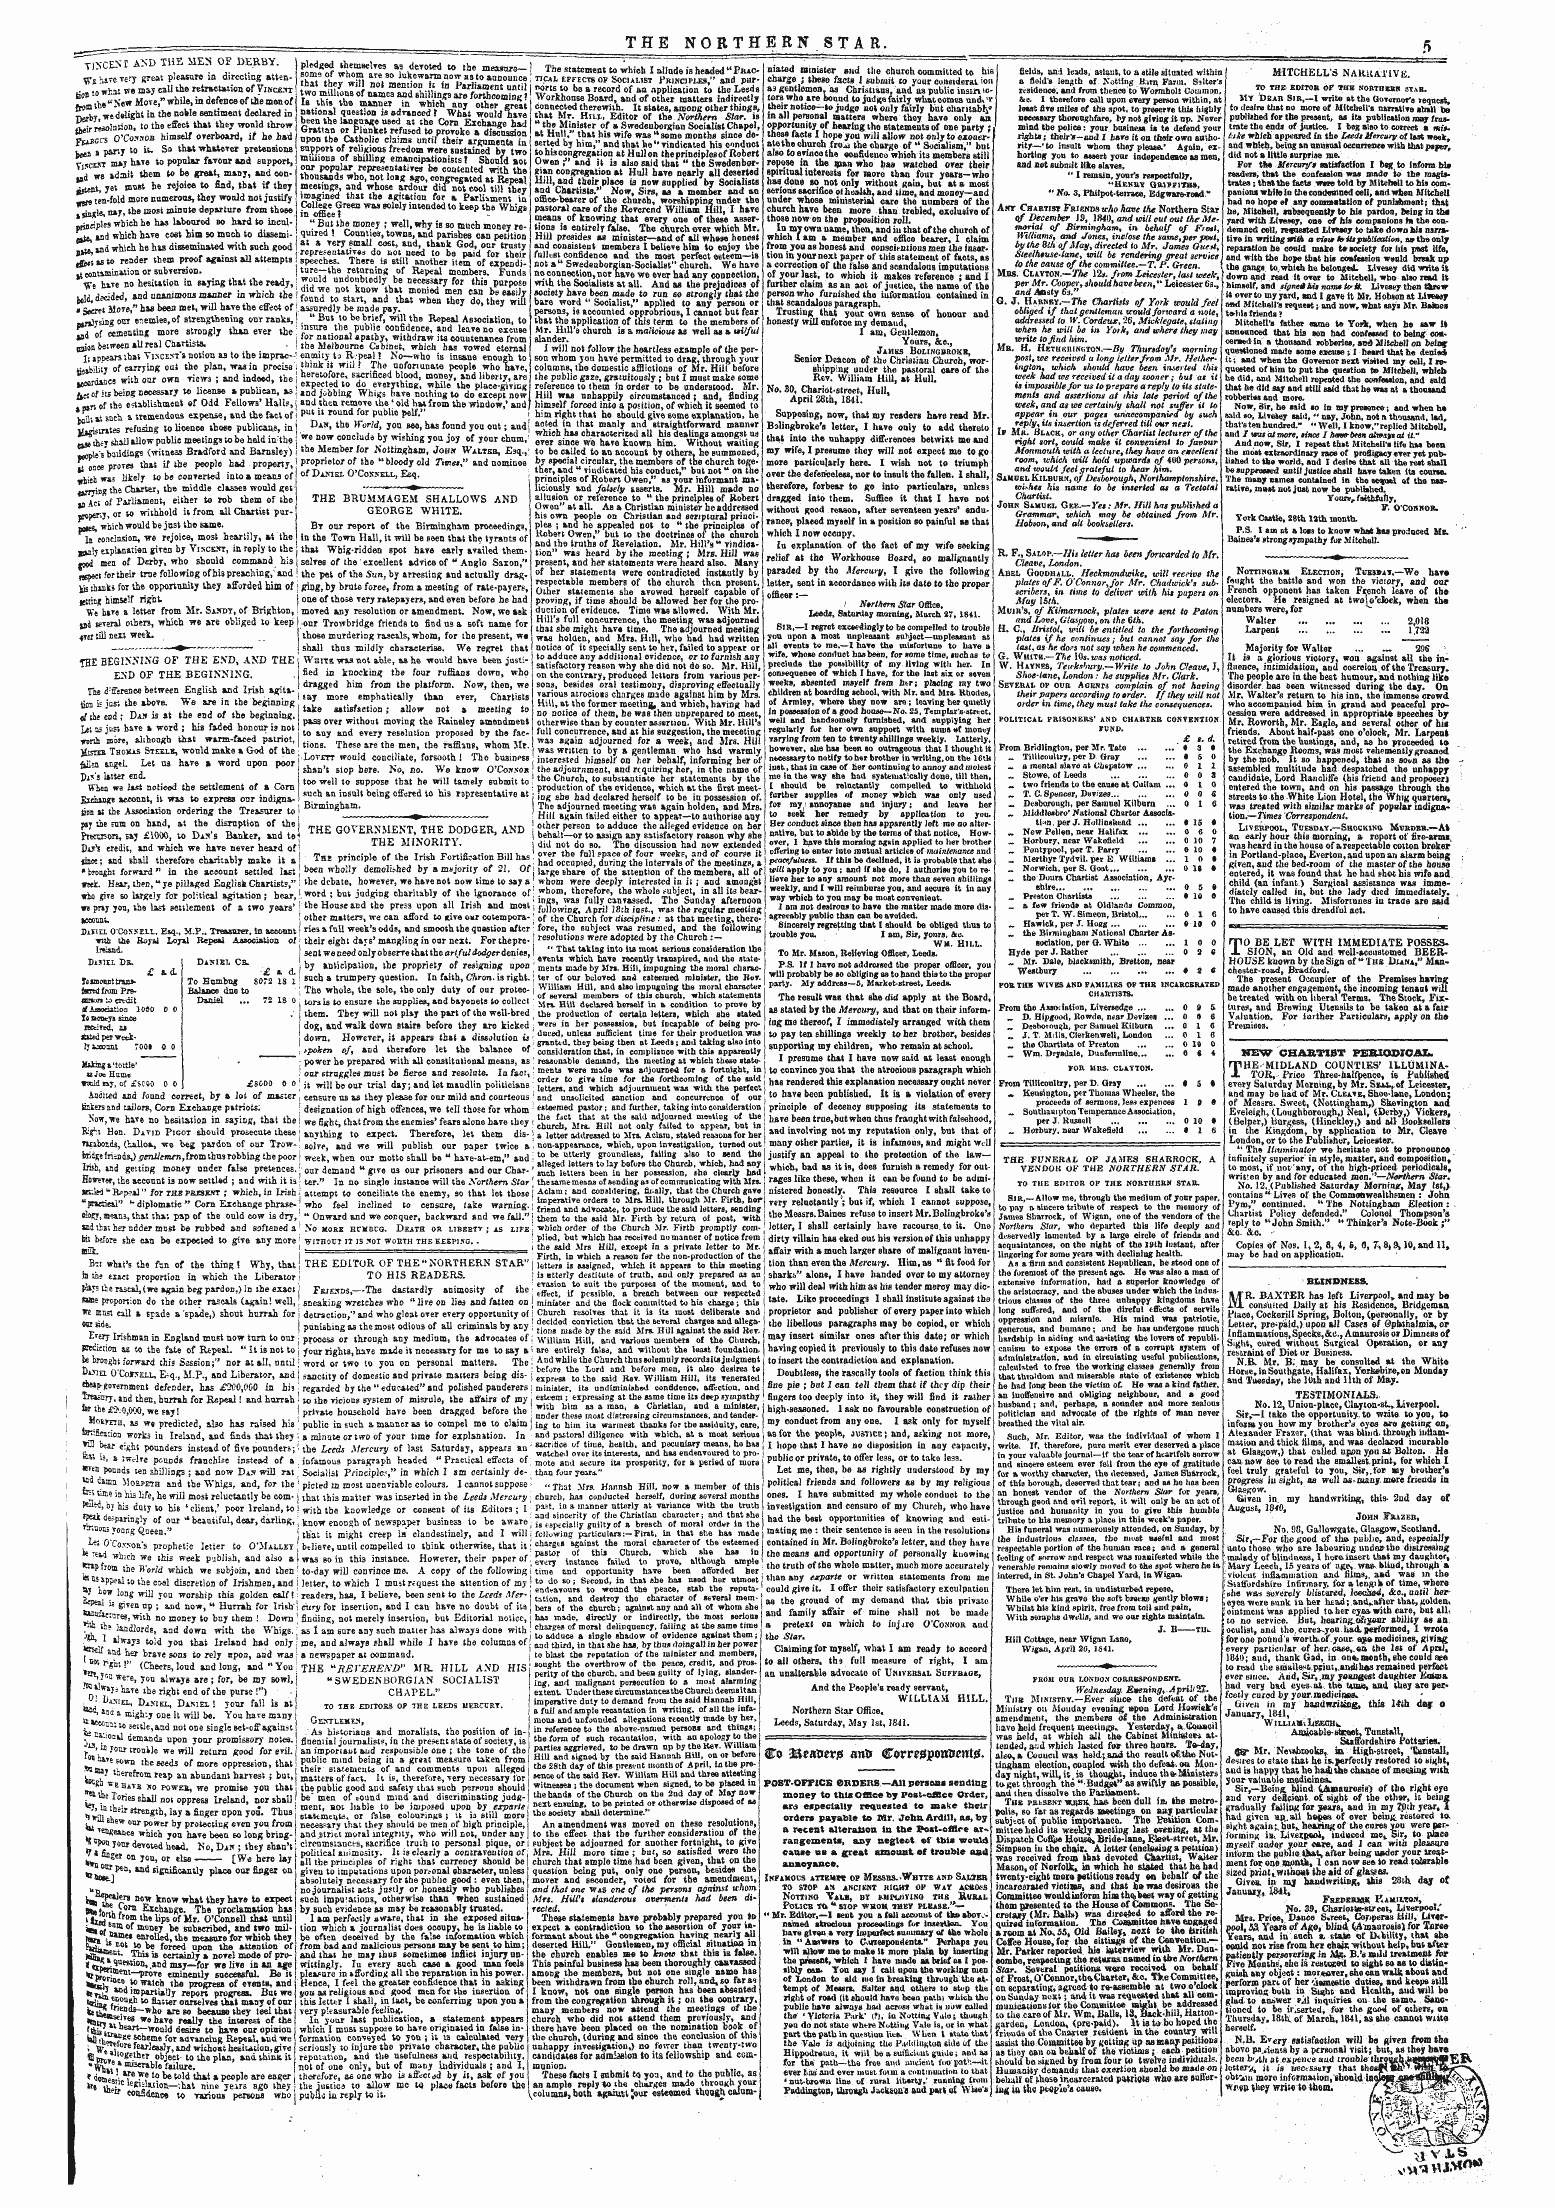 Northern Star (1837-1852): jS F Y, 3rd edition - The Editor Of The "Northern Star" ) To His Readers. '